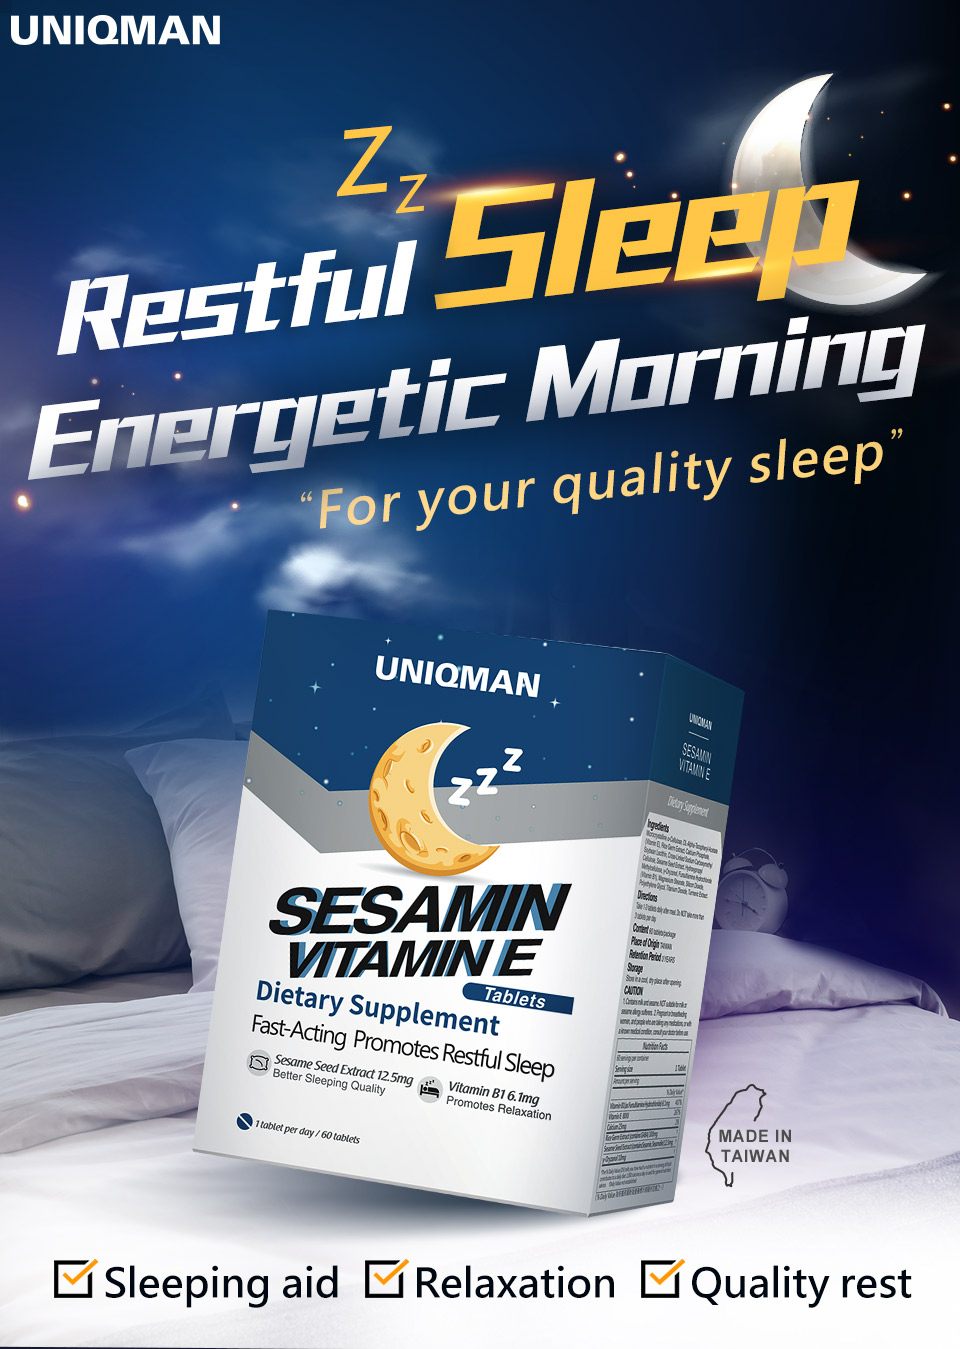 UNIQMAN Sesamin with Vitamin E helps you fall asleep faster and deal with insomnia